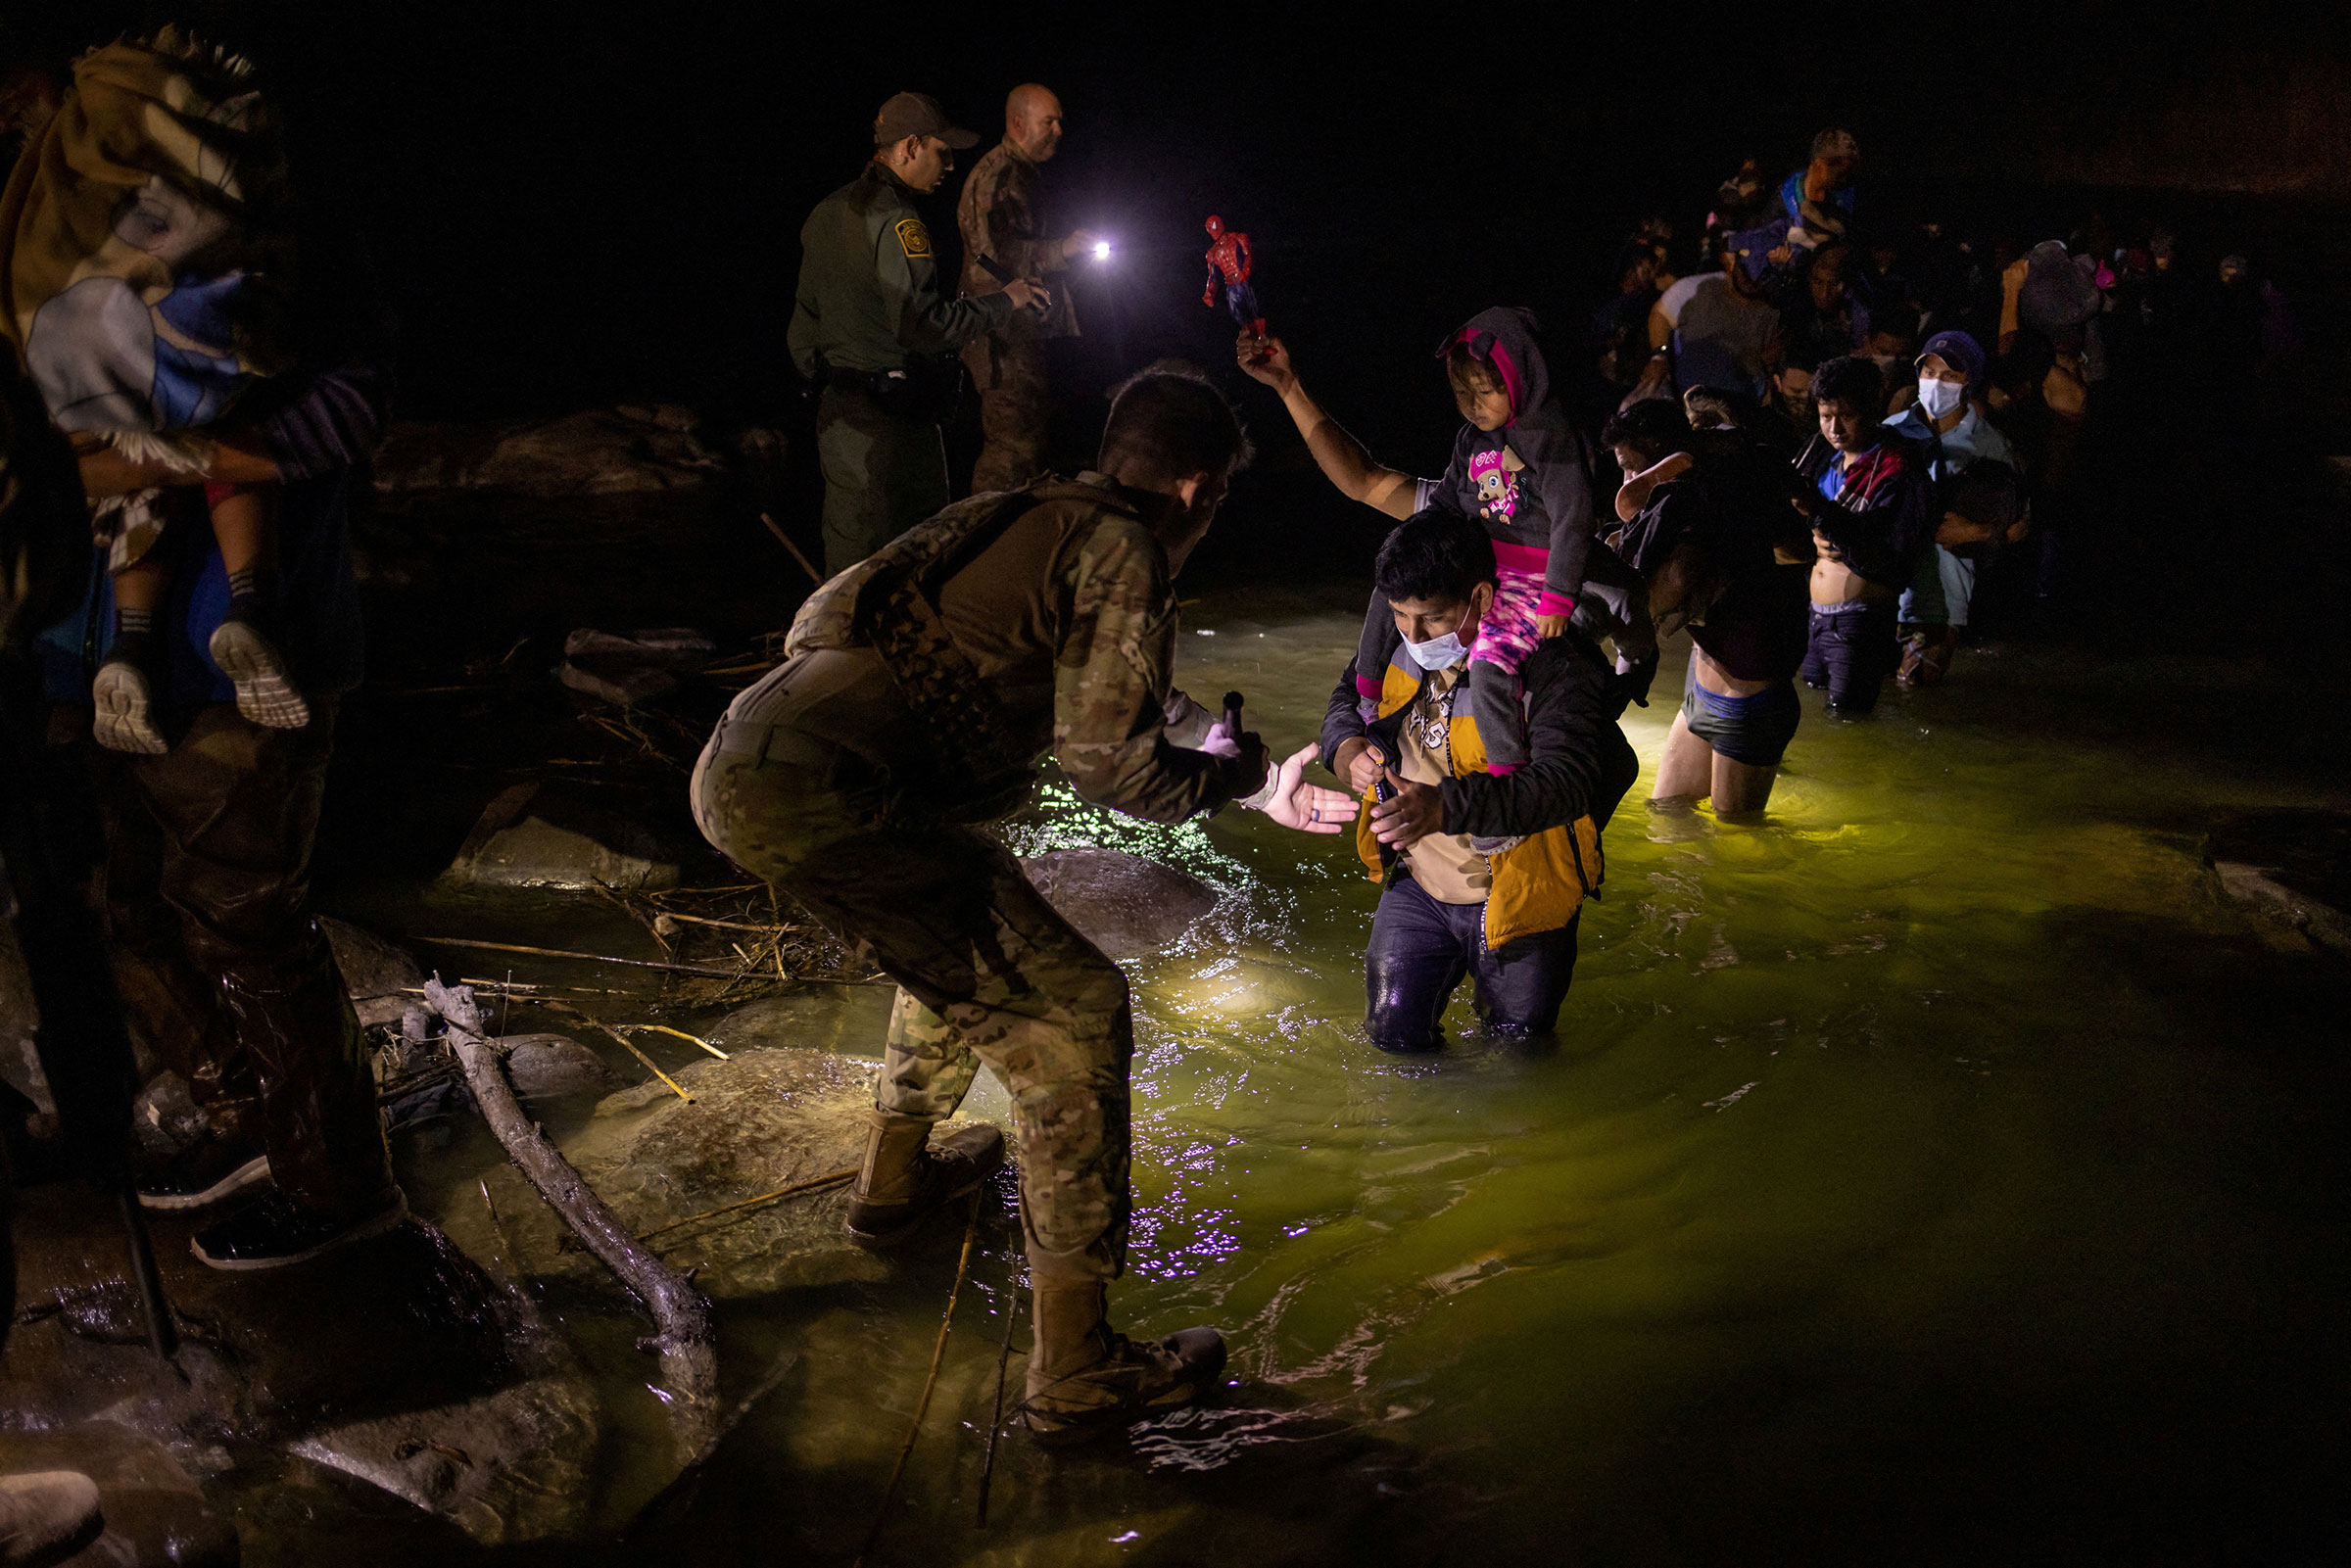 Border patrol agents and members of the Texas Army National Guard light the path as asylum-seeking migrants from Central and South America wade through the Rio Grande river into the United States from Mexico, in Roma, Texas, on March 4.